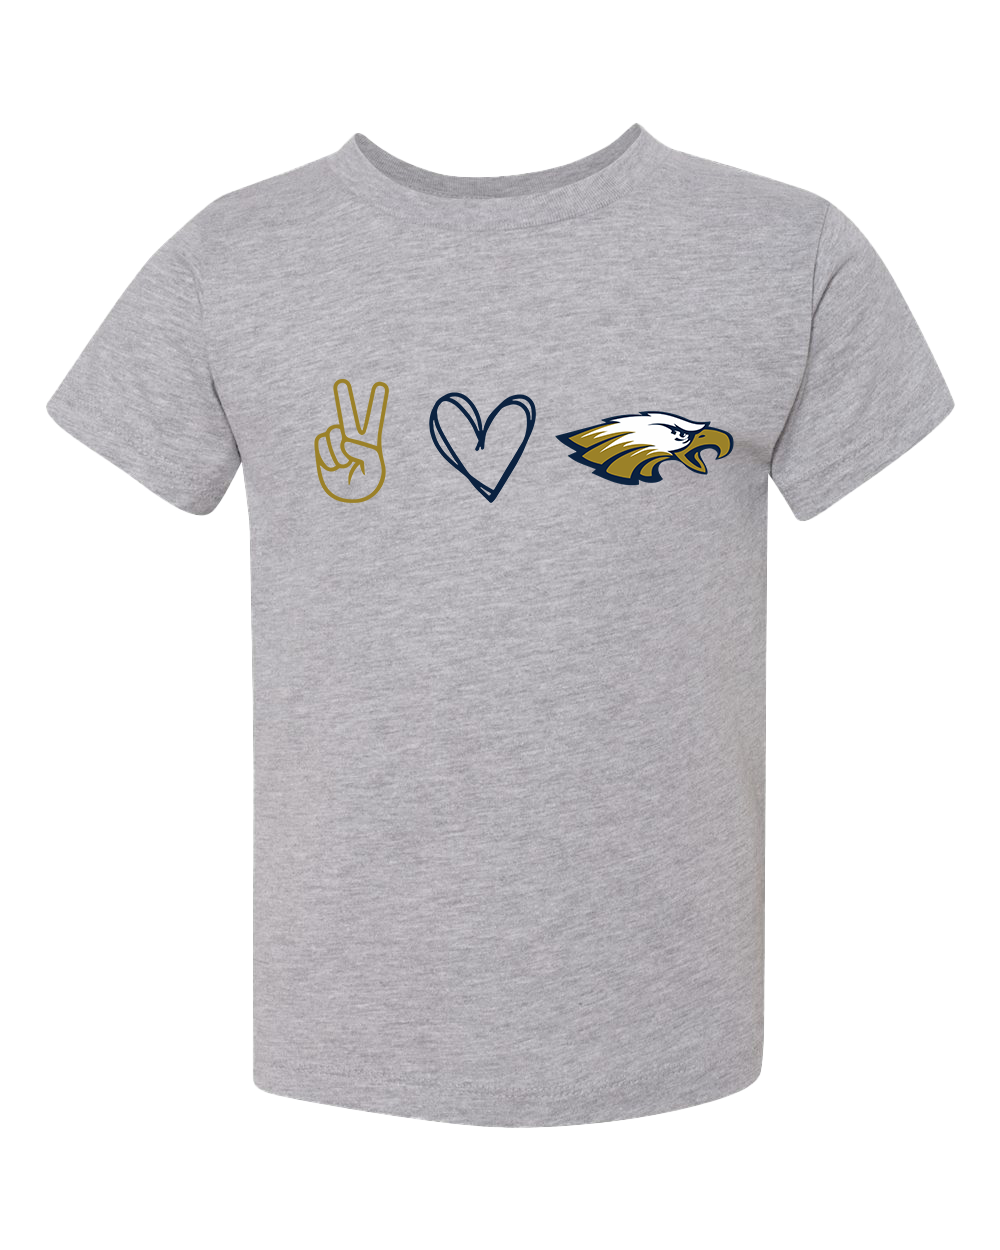 Toddler Peace Love Golden Eagles - Athletic Heather